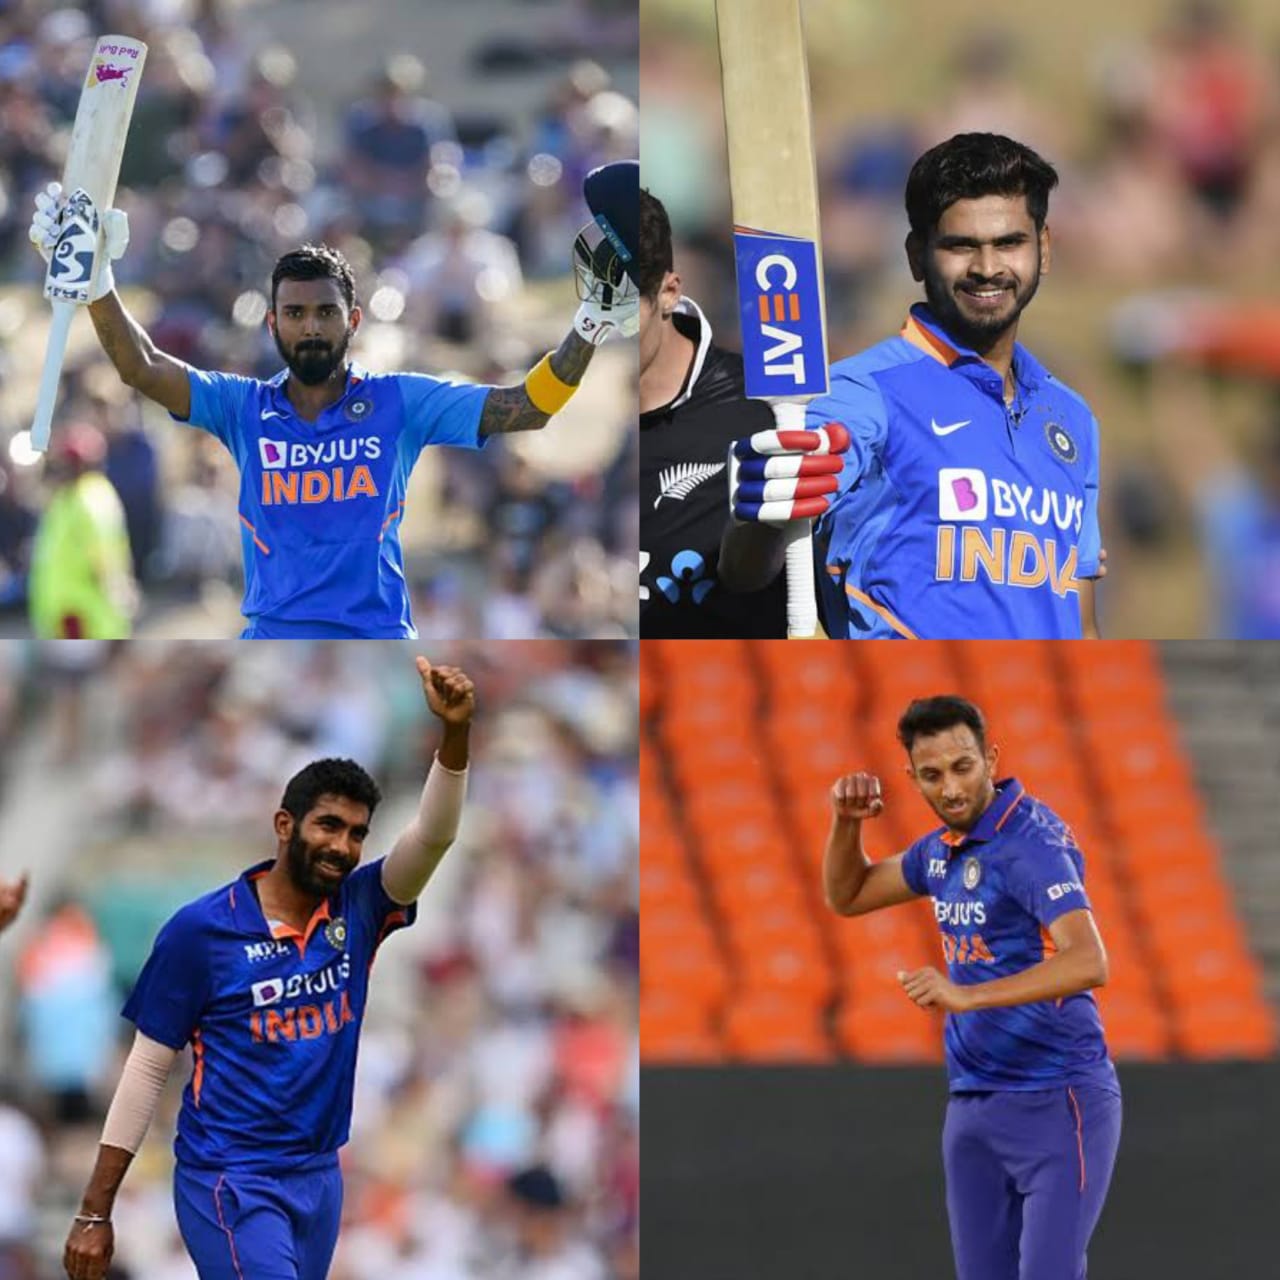 2023 Asia Cup: India's Dream Team Announced and Ready to Dominate